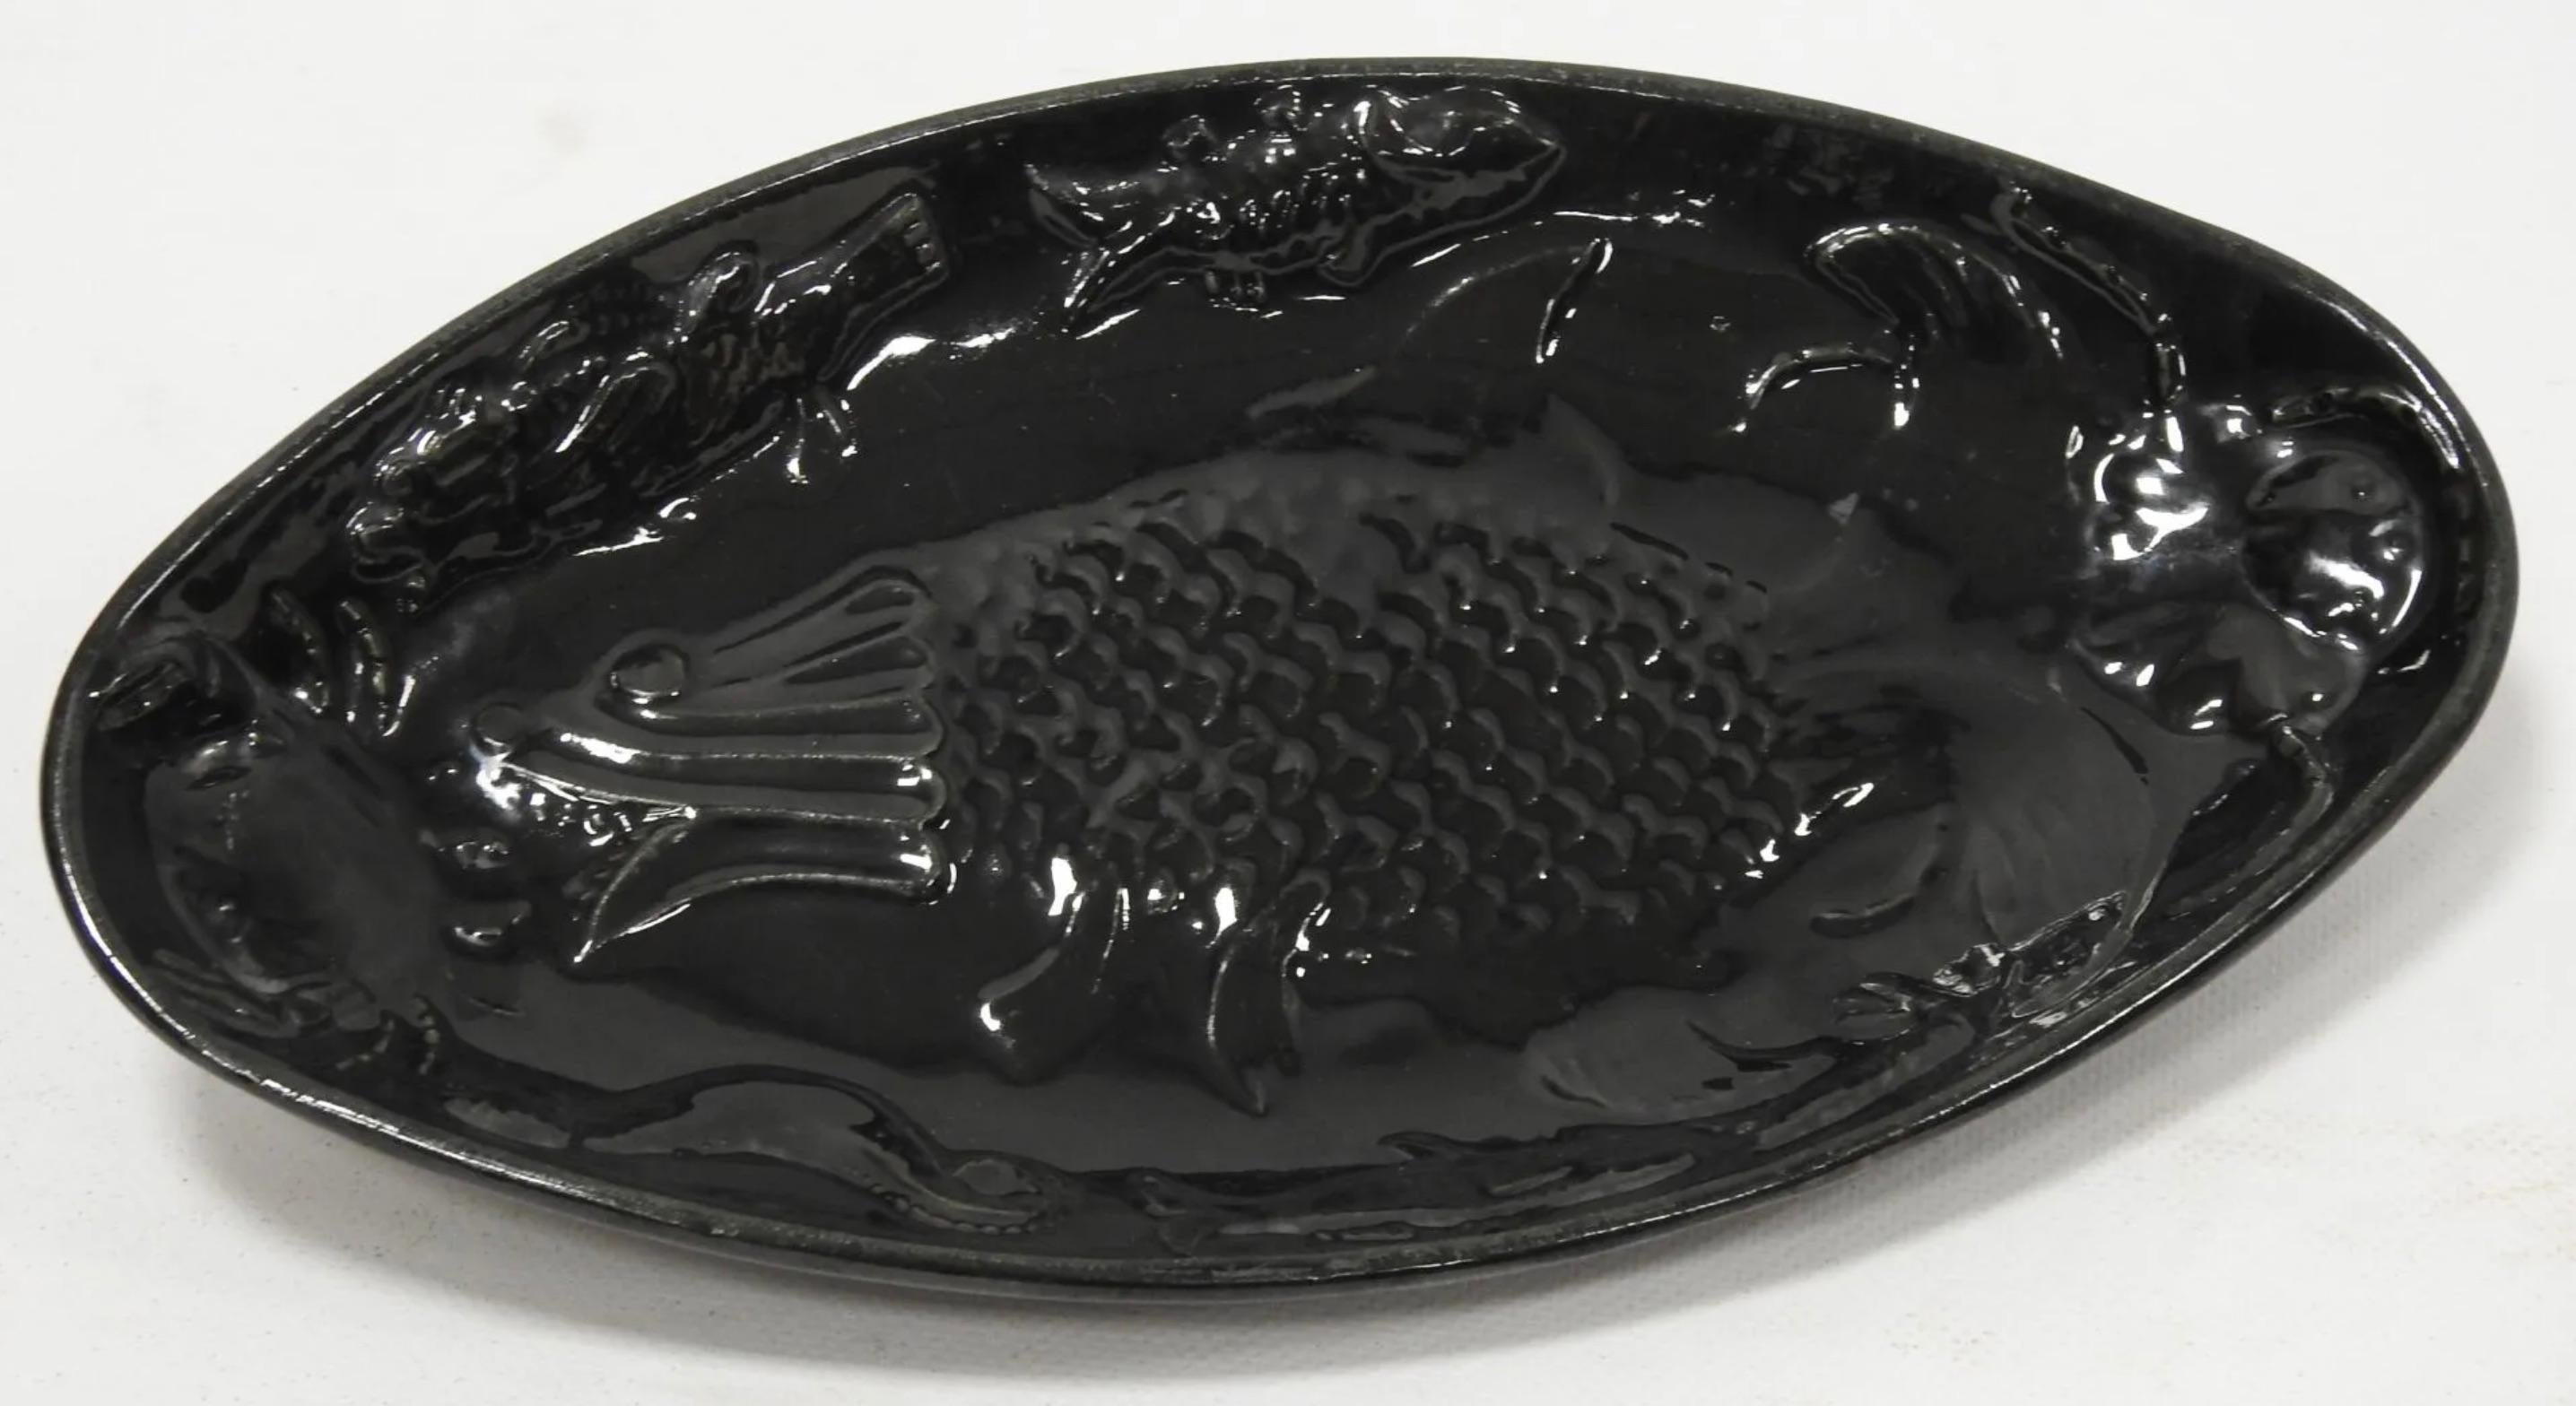 Ceramic Ceramony Vallauris Earthenware Set Mat Black and Shiny Lead 1950 - 38 Pieces For Sale